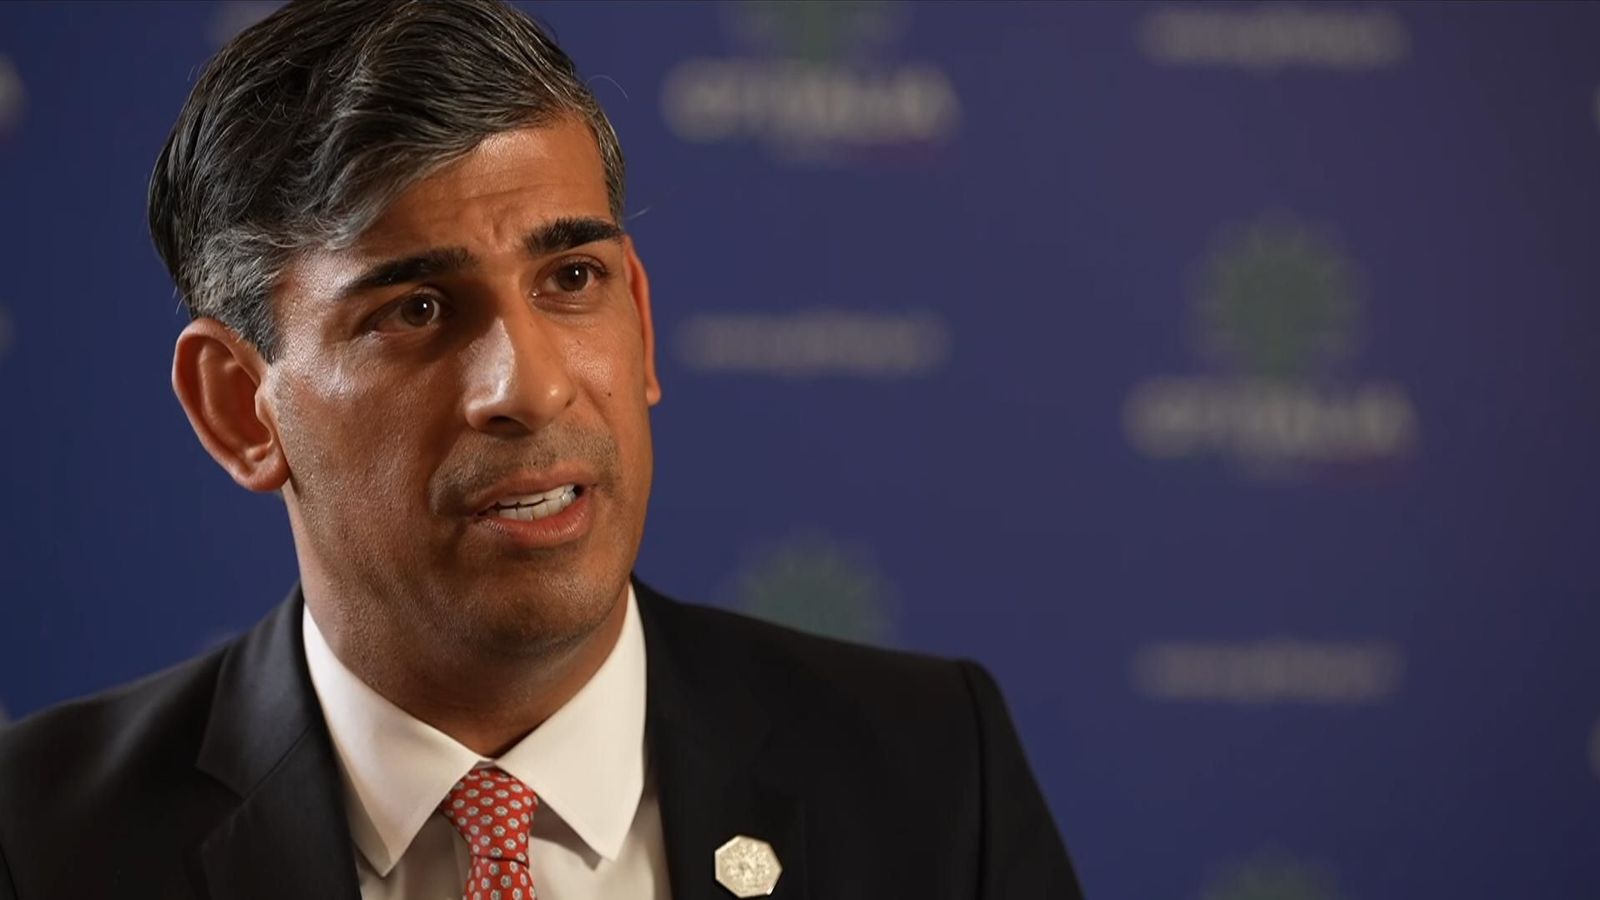 Rishi Sunak says voting for Reform would hand Labour 'blank cheque' as he responds to poll crossover